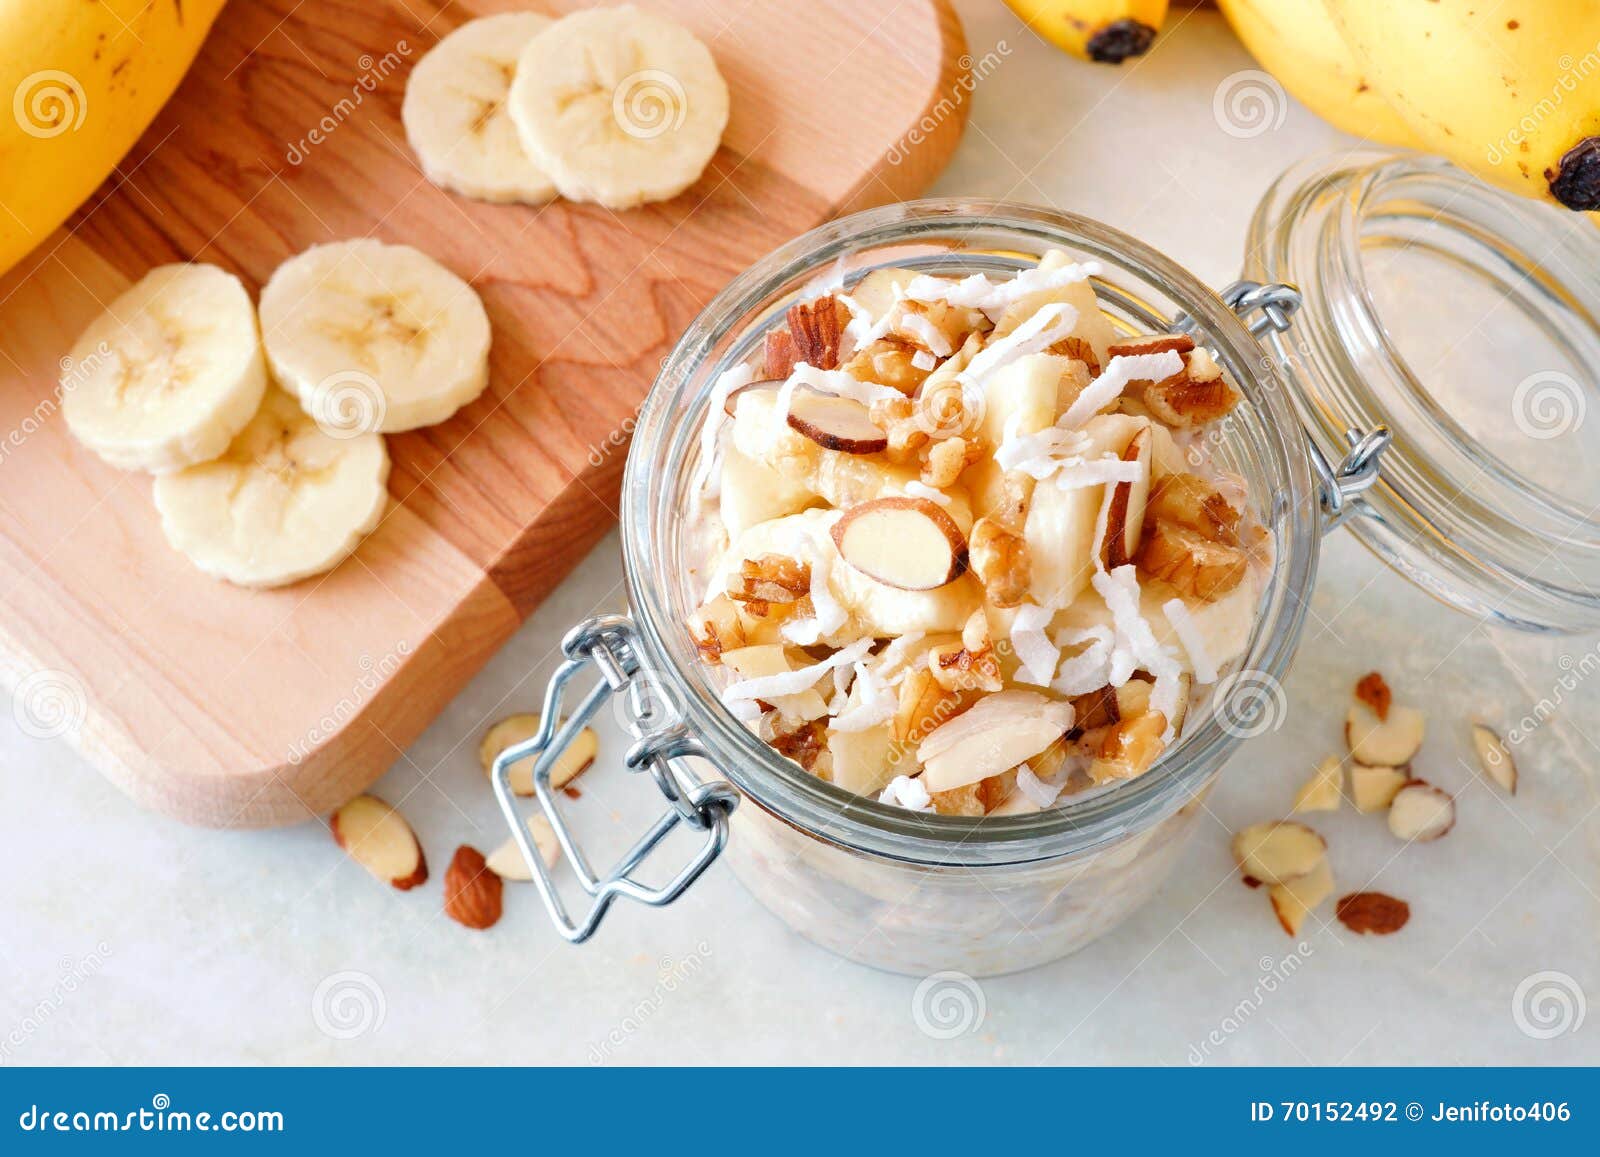 banana nut overnight oats in glass canning jar, downward view